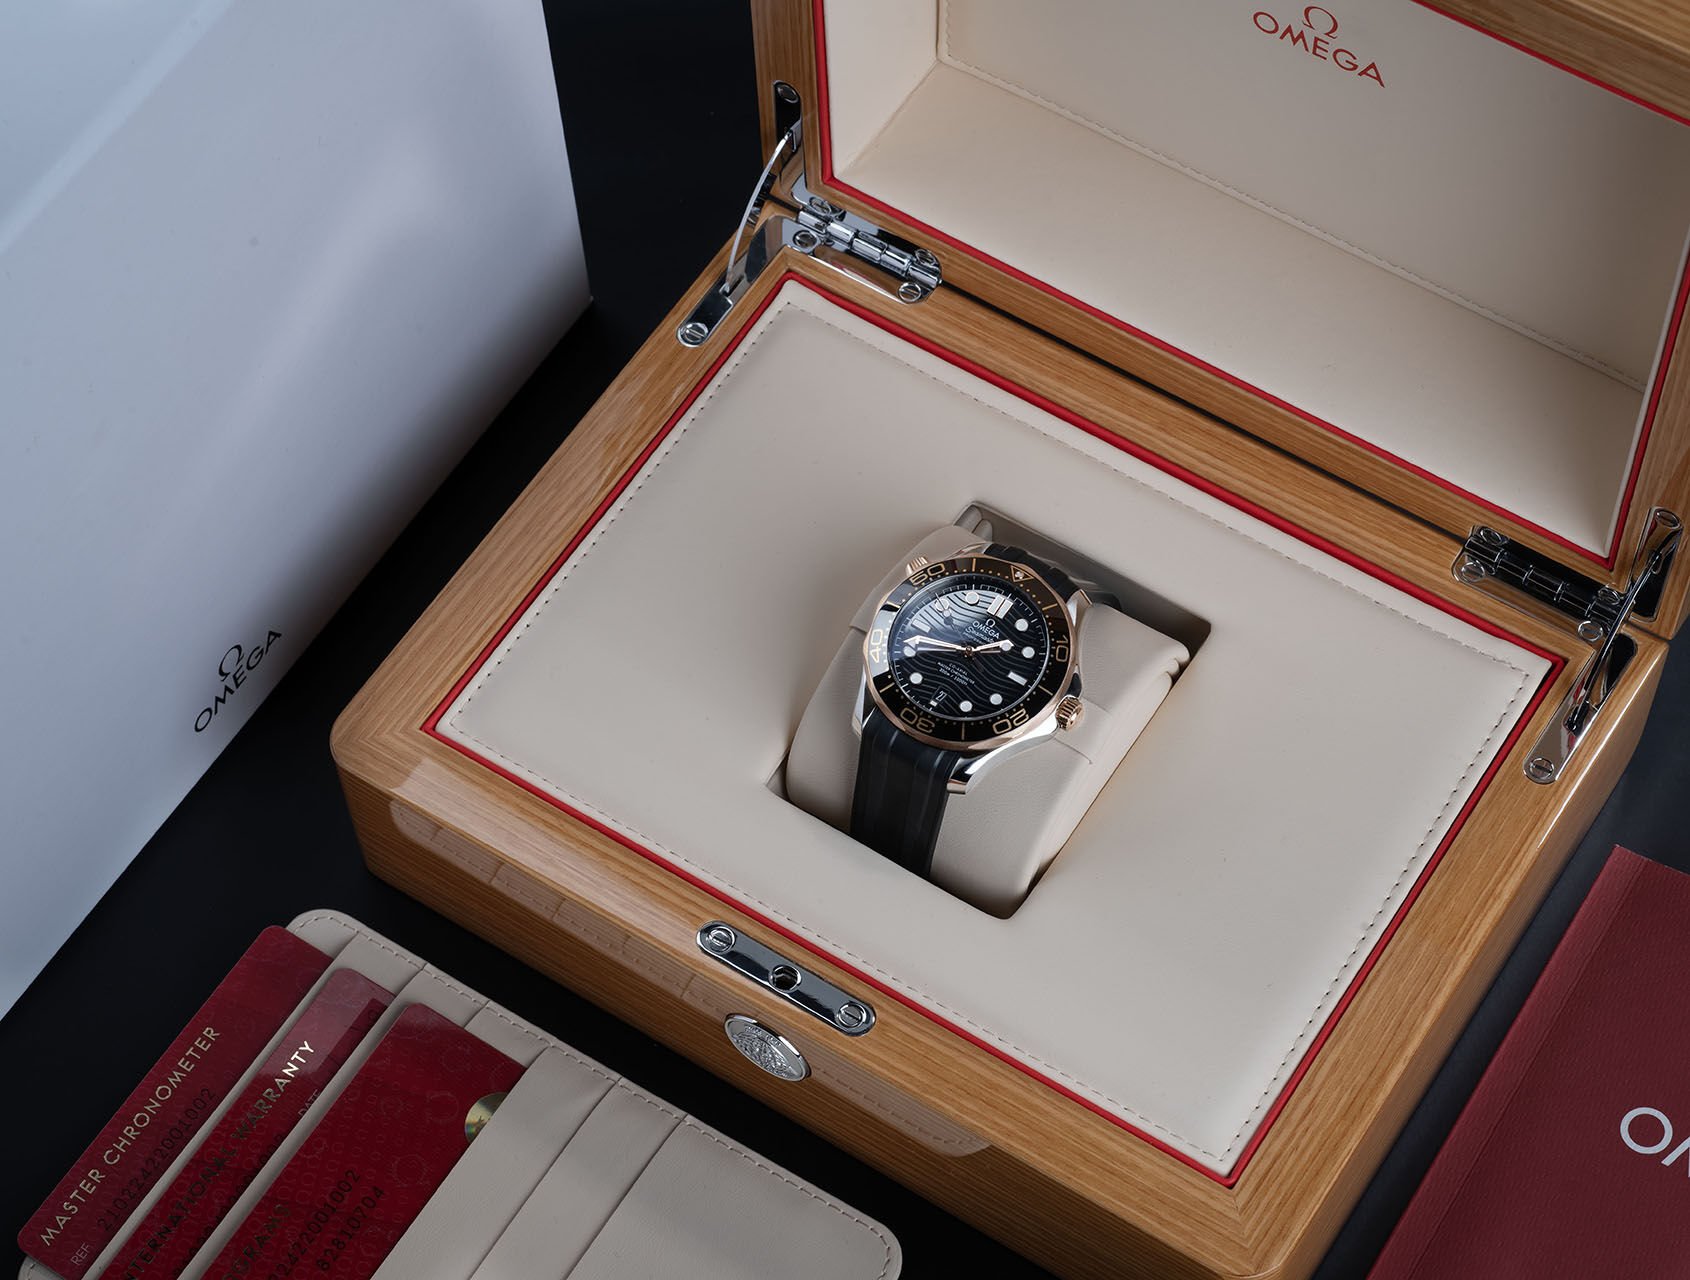 ref 210.22.42.20.01.002 | Co-Axial Master Chronometer | Omega Seamaster